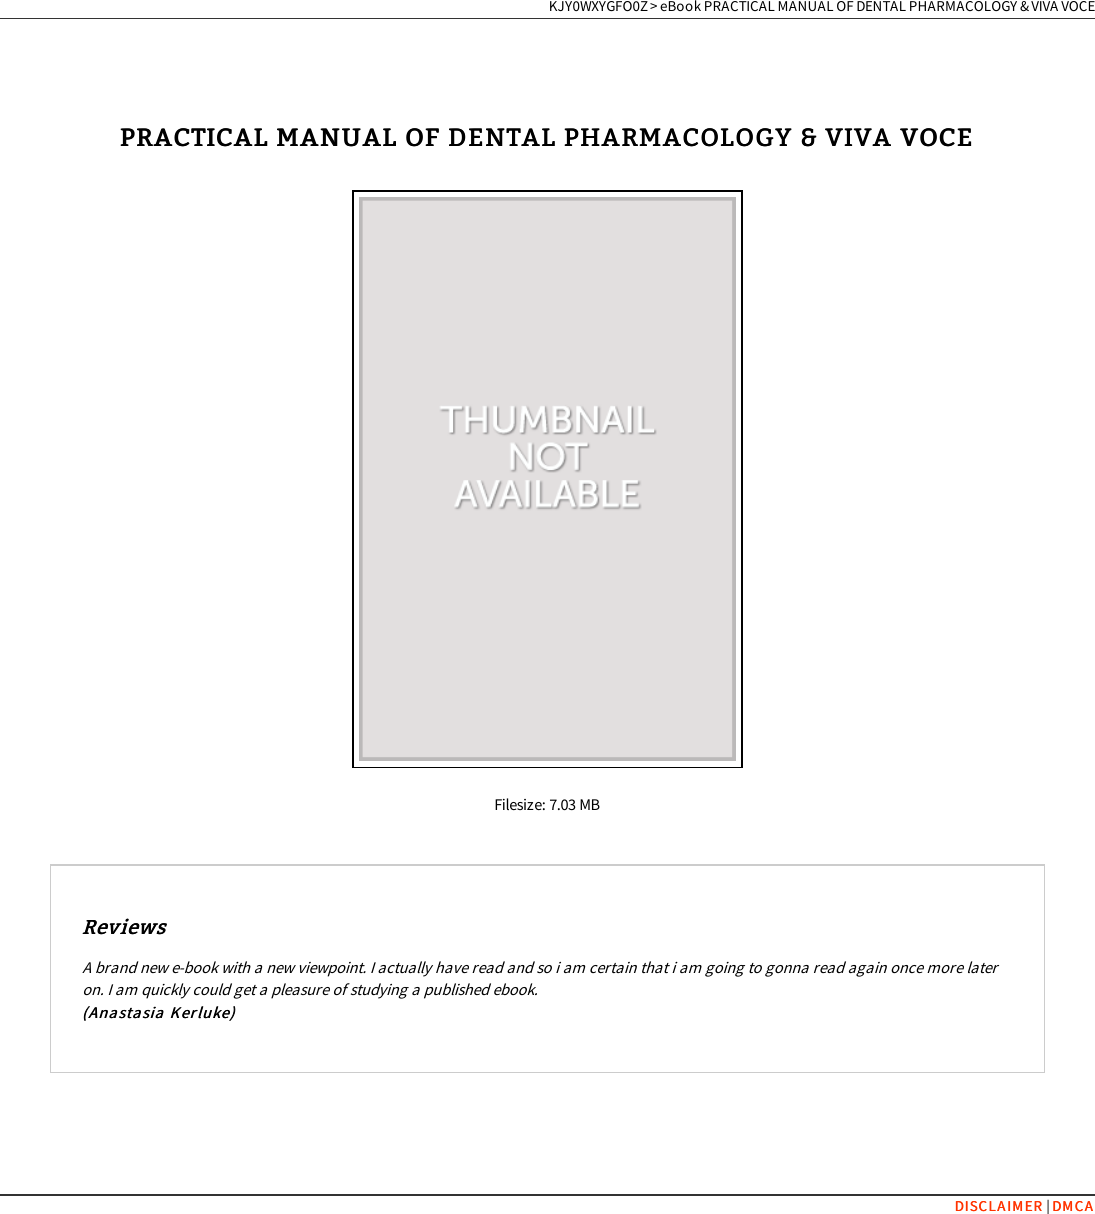 Page 1 of 3 - Book PRACTICAL MANUAL OF DENTAL PHARMACOLOGY & VIVA VOCE # WTH8ZRLY2KM0 VLH3z Gnu W-practical-manual-of-dental-pharmacology-amp-viva-doc